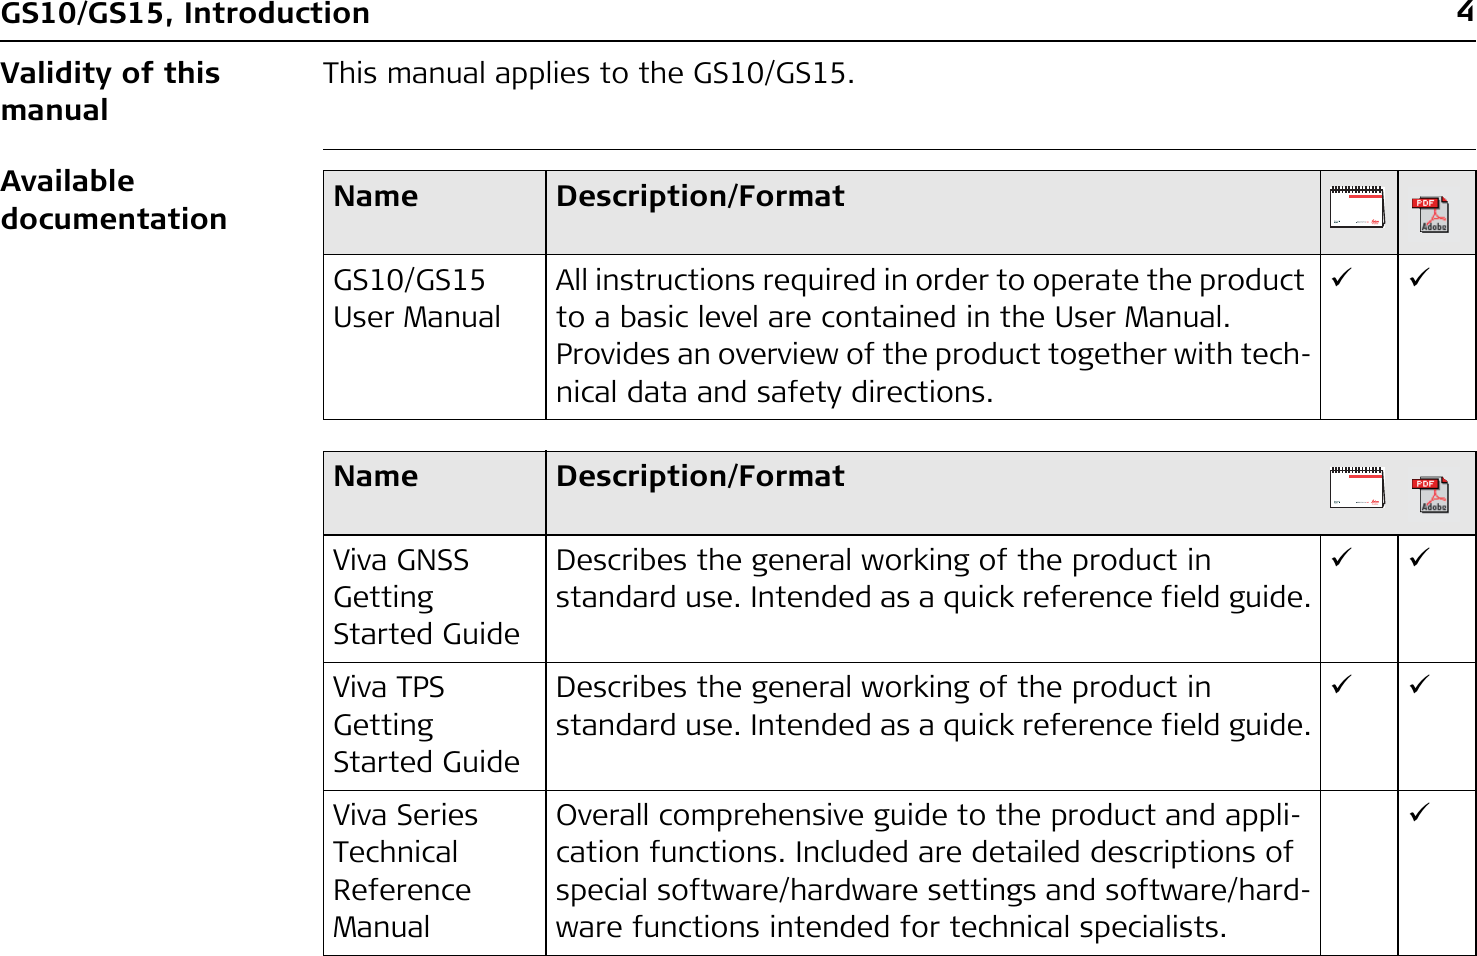 4GS10/GS15, IntroductionValidity of this manualThis manual applies to the GS10/GS15.Available documentation Name Description/FormatGS10/GS15 User ManualAll instructions required in order to operate the product to a basic level are contained in the User Manual. Provides an overview of the product together with tech-nical data and safety directions.99Name Description/FormatViva GNSS Getting Started GuideDescribes the general working of the product in standard use. Intended as a quick reference field guide.99Viva TPS Getting Started GuideDescribes the general working of the product in standard use. Intended as a quick reference field guide.99Viva Series Technical Reference ManualOverall comprehensive guide to the product and appli-cation functions. Included are detailed descriptions of special software/hardware settings and software/hard-ware functions intended for technical specialists.9